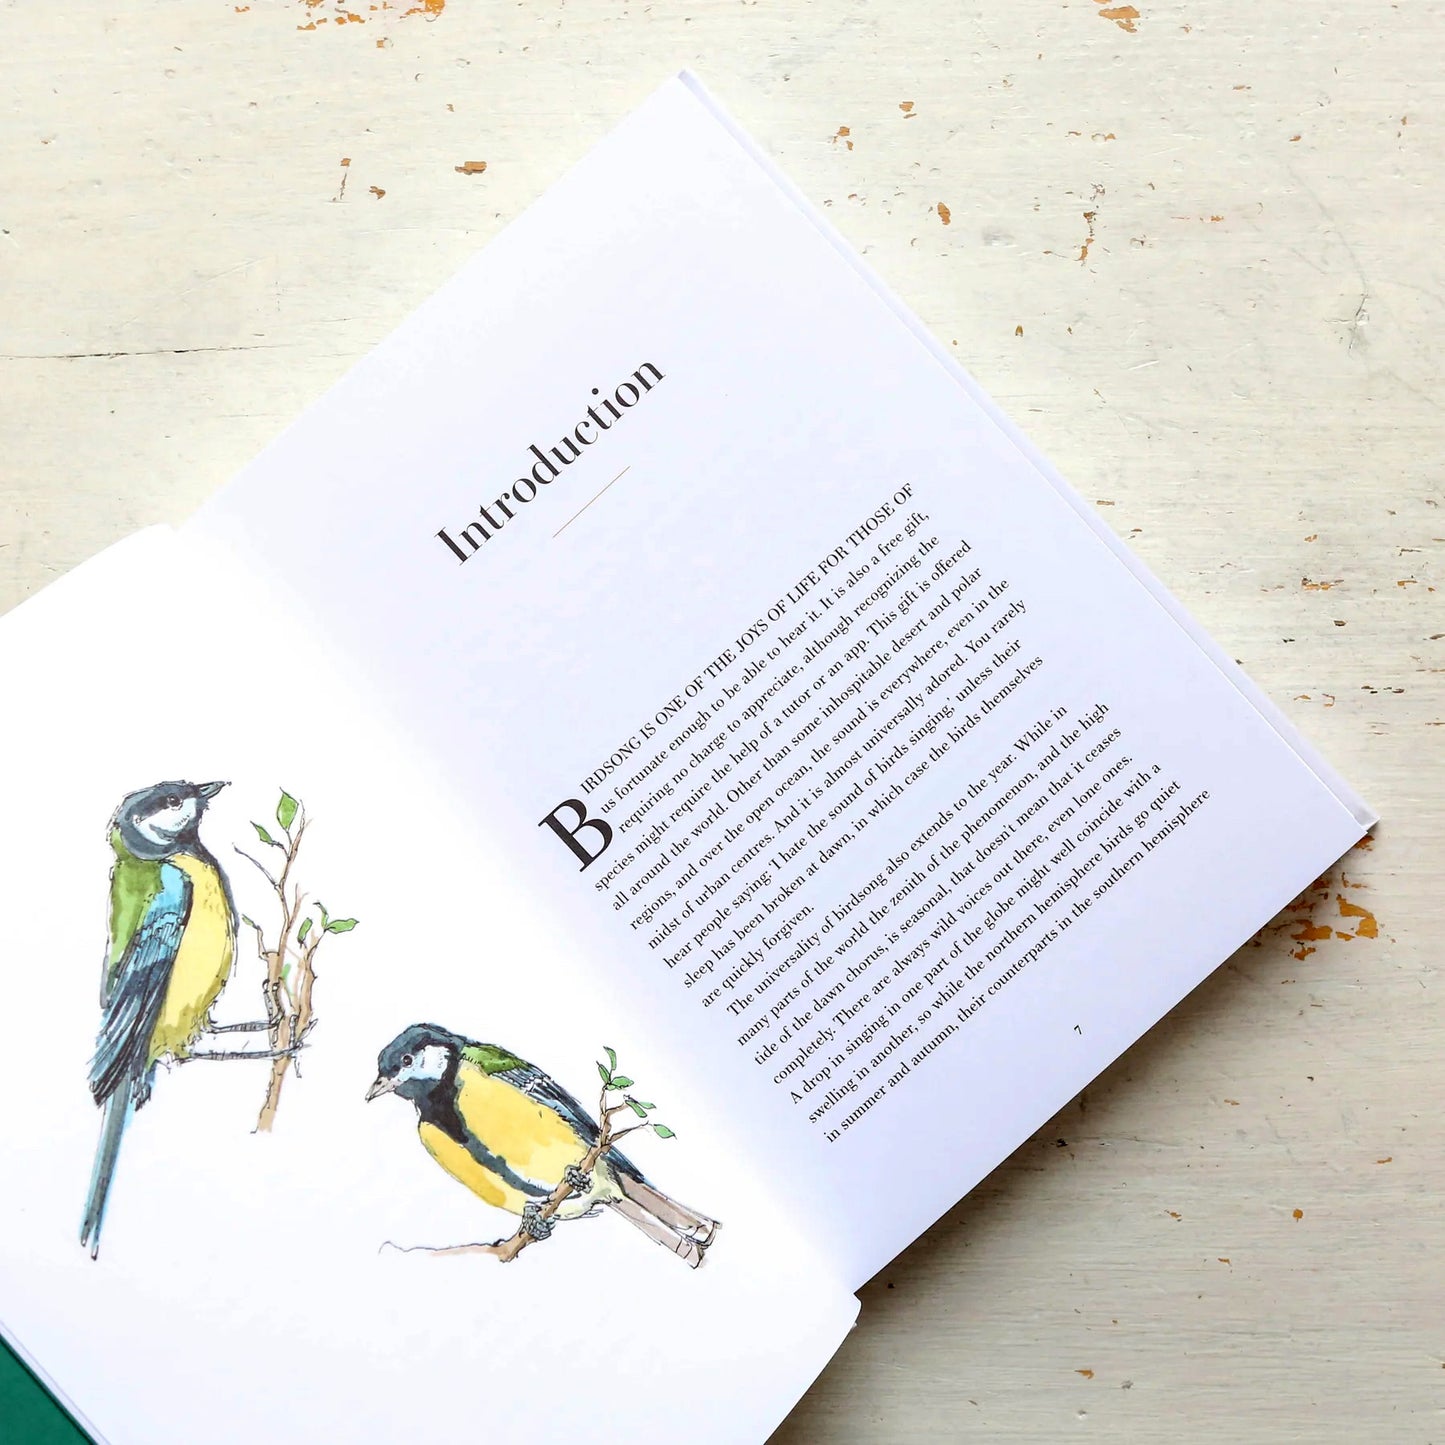 A Year of Birdsong: 52 Stories of Songbirds